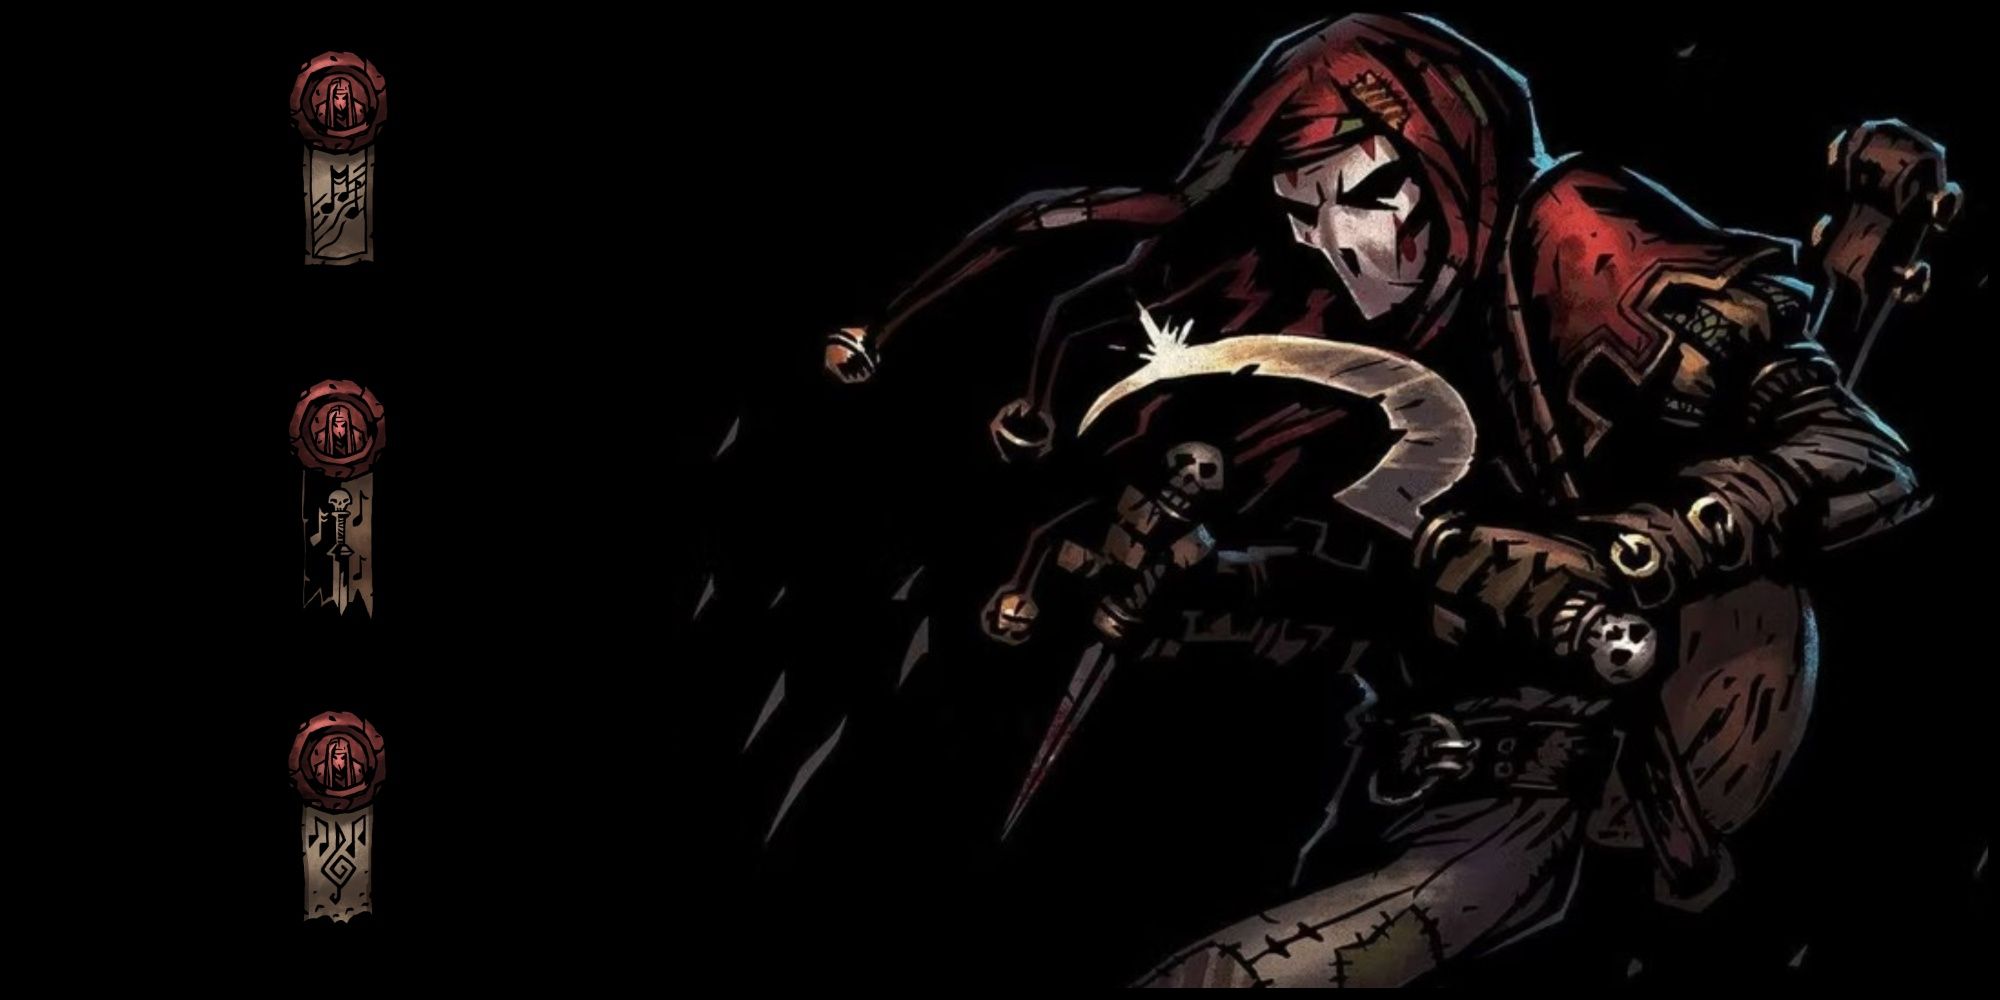 A screenshot of The Jester from Darkest Dungeon 2 next to his three Hero Paths